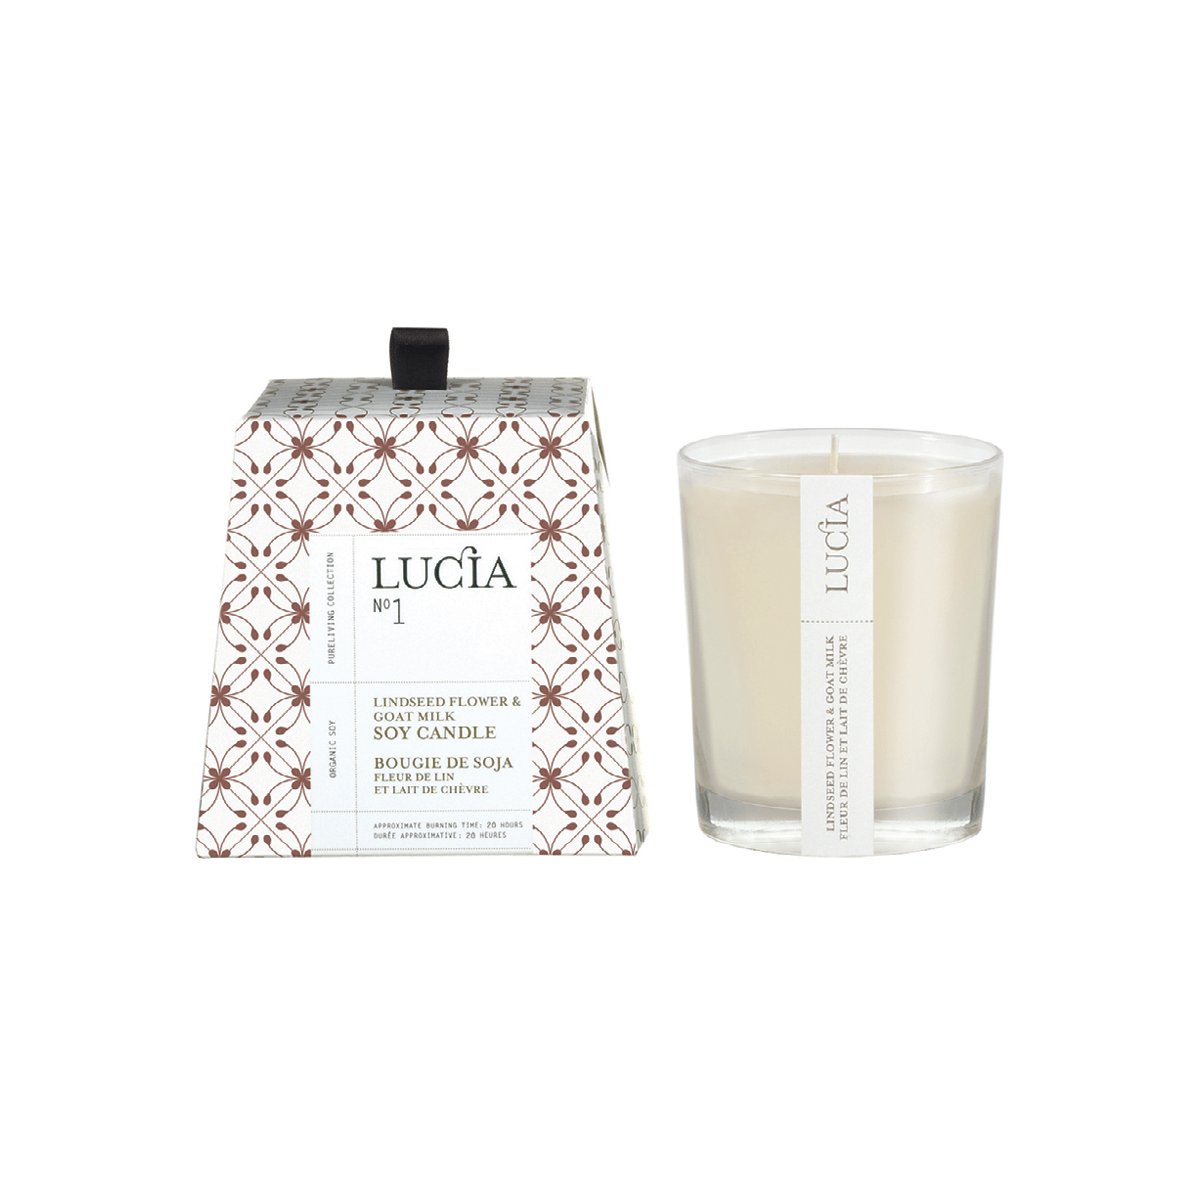 Lucia #1-Linseed & Goat Milk Candles-2 sizes